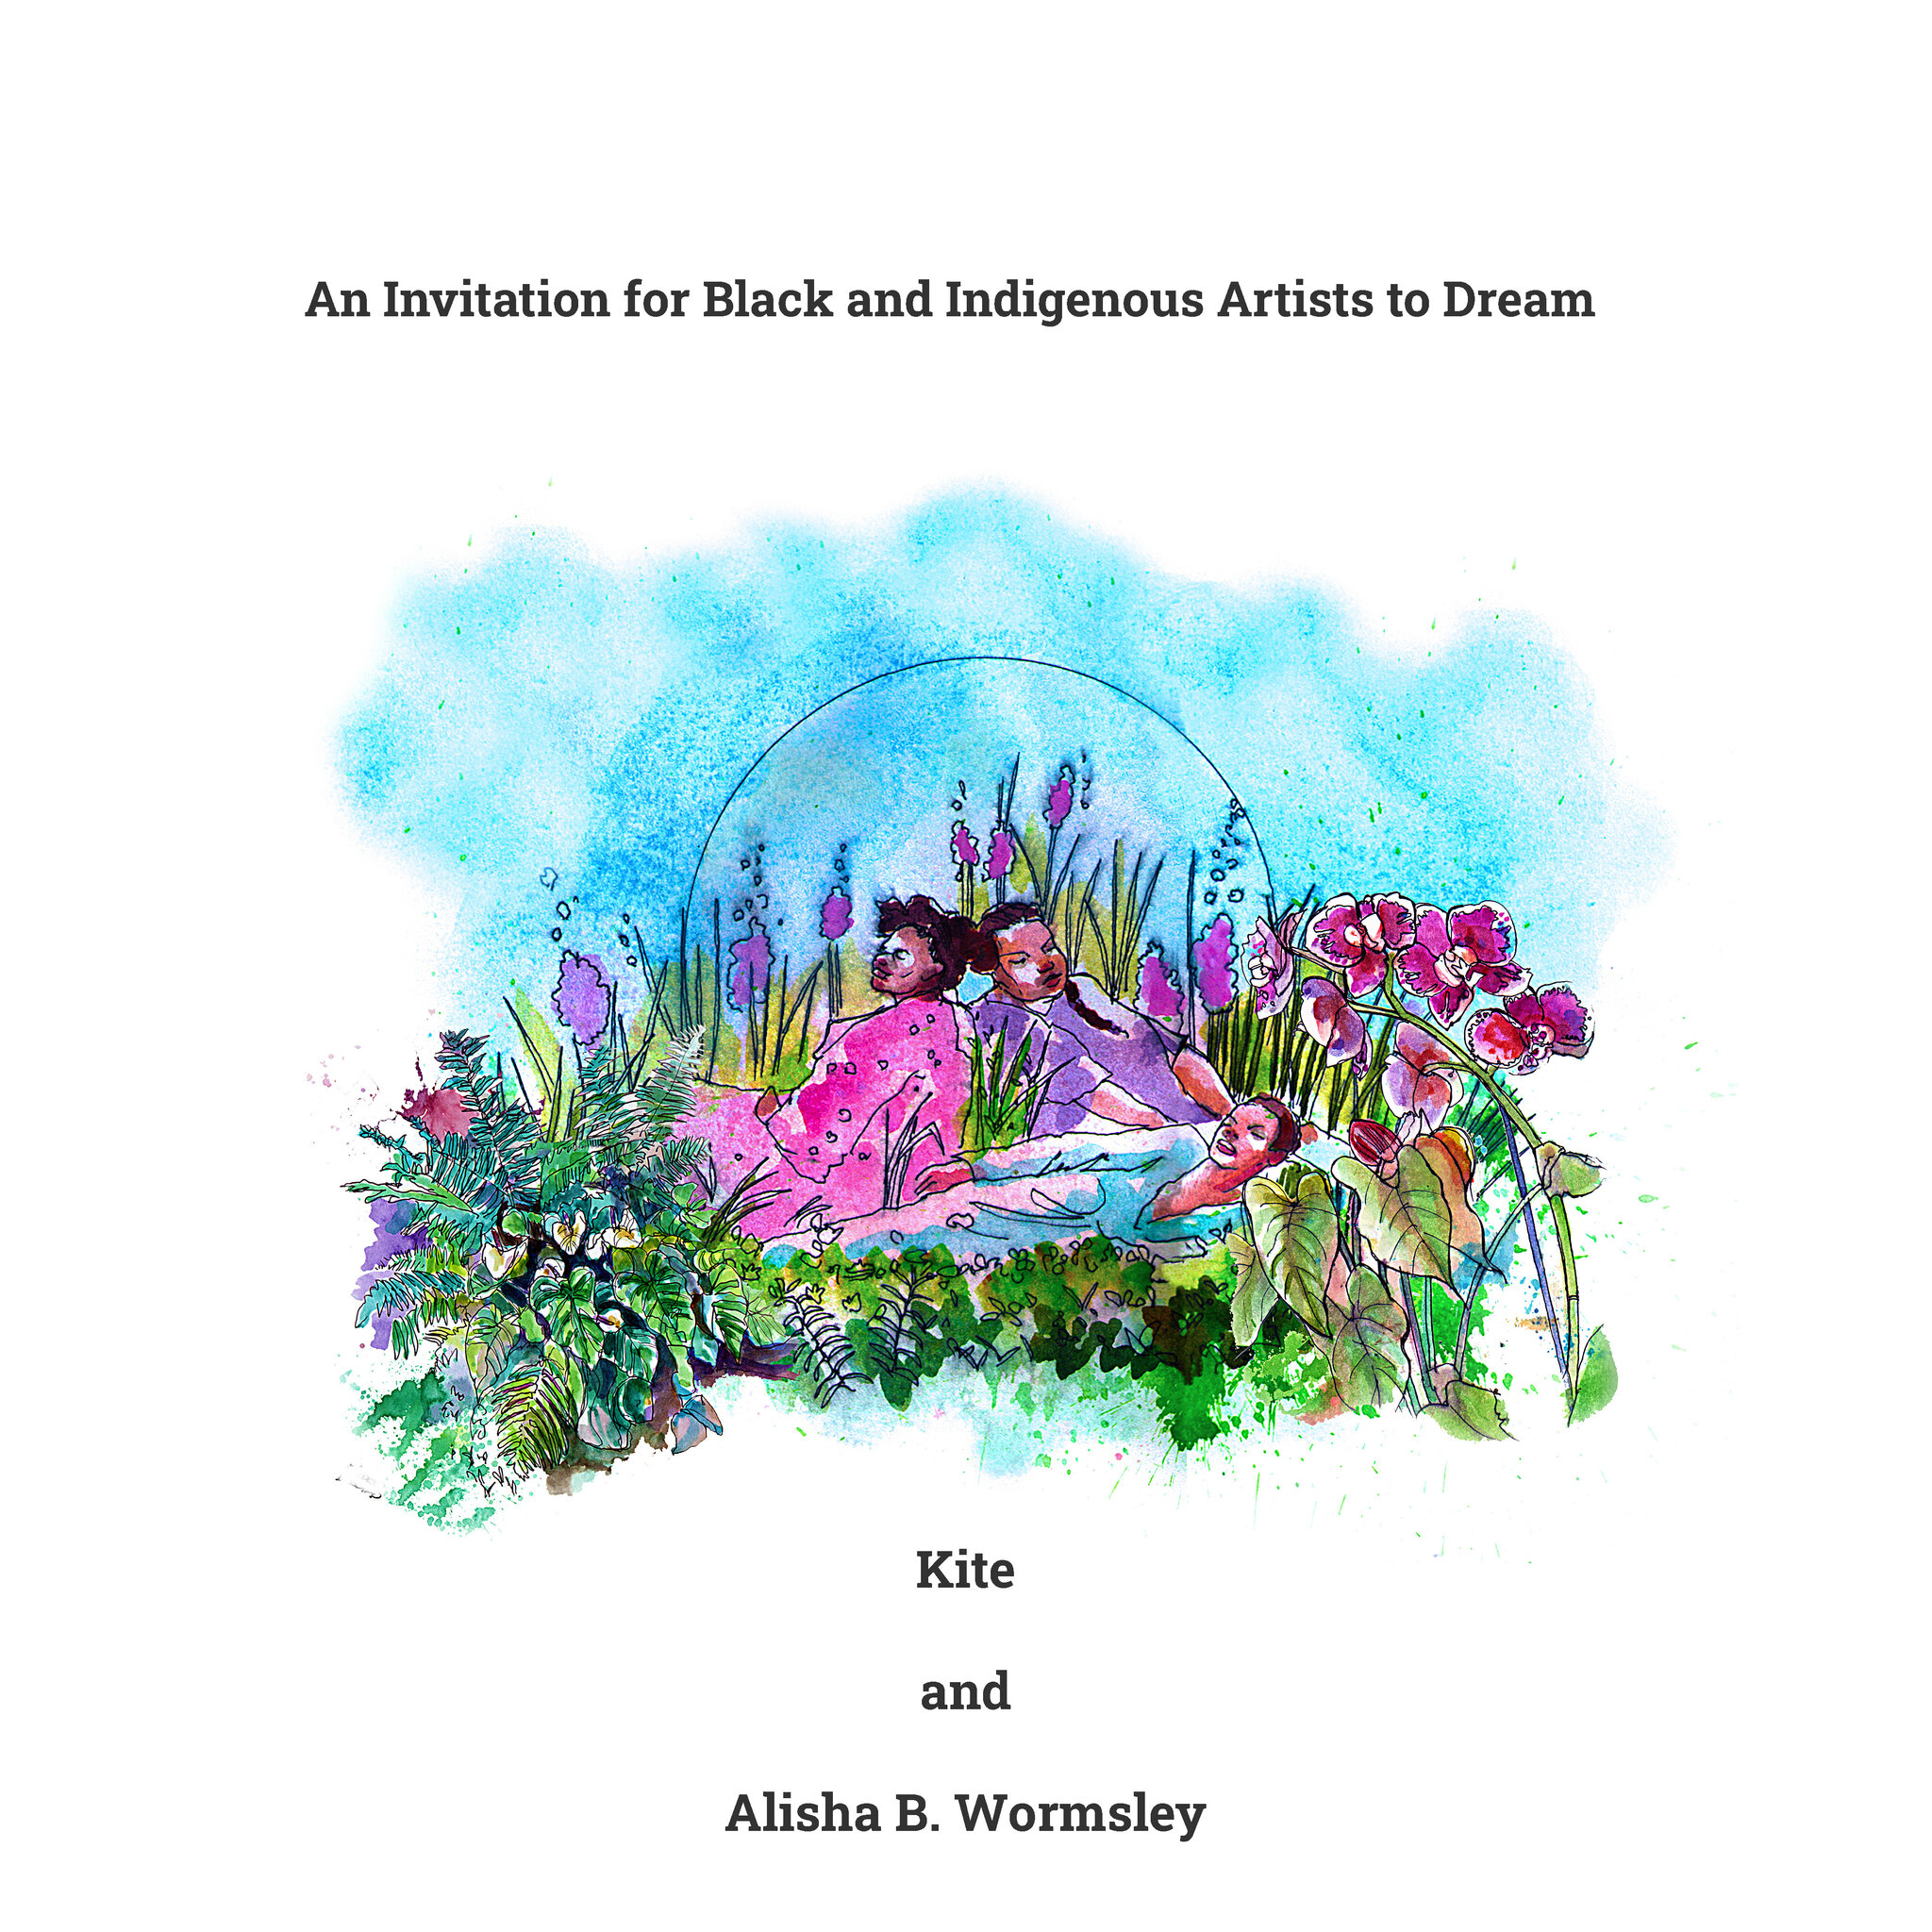 An Invitation for Black and Indigenous Artists to Dream, Kite and Alisha B Wormsley, 2021